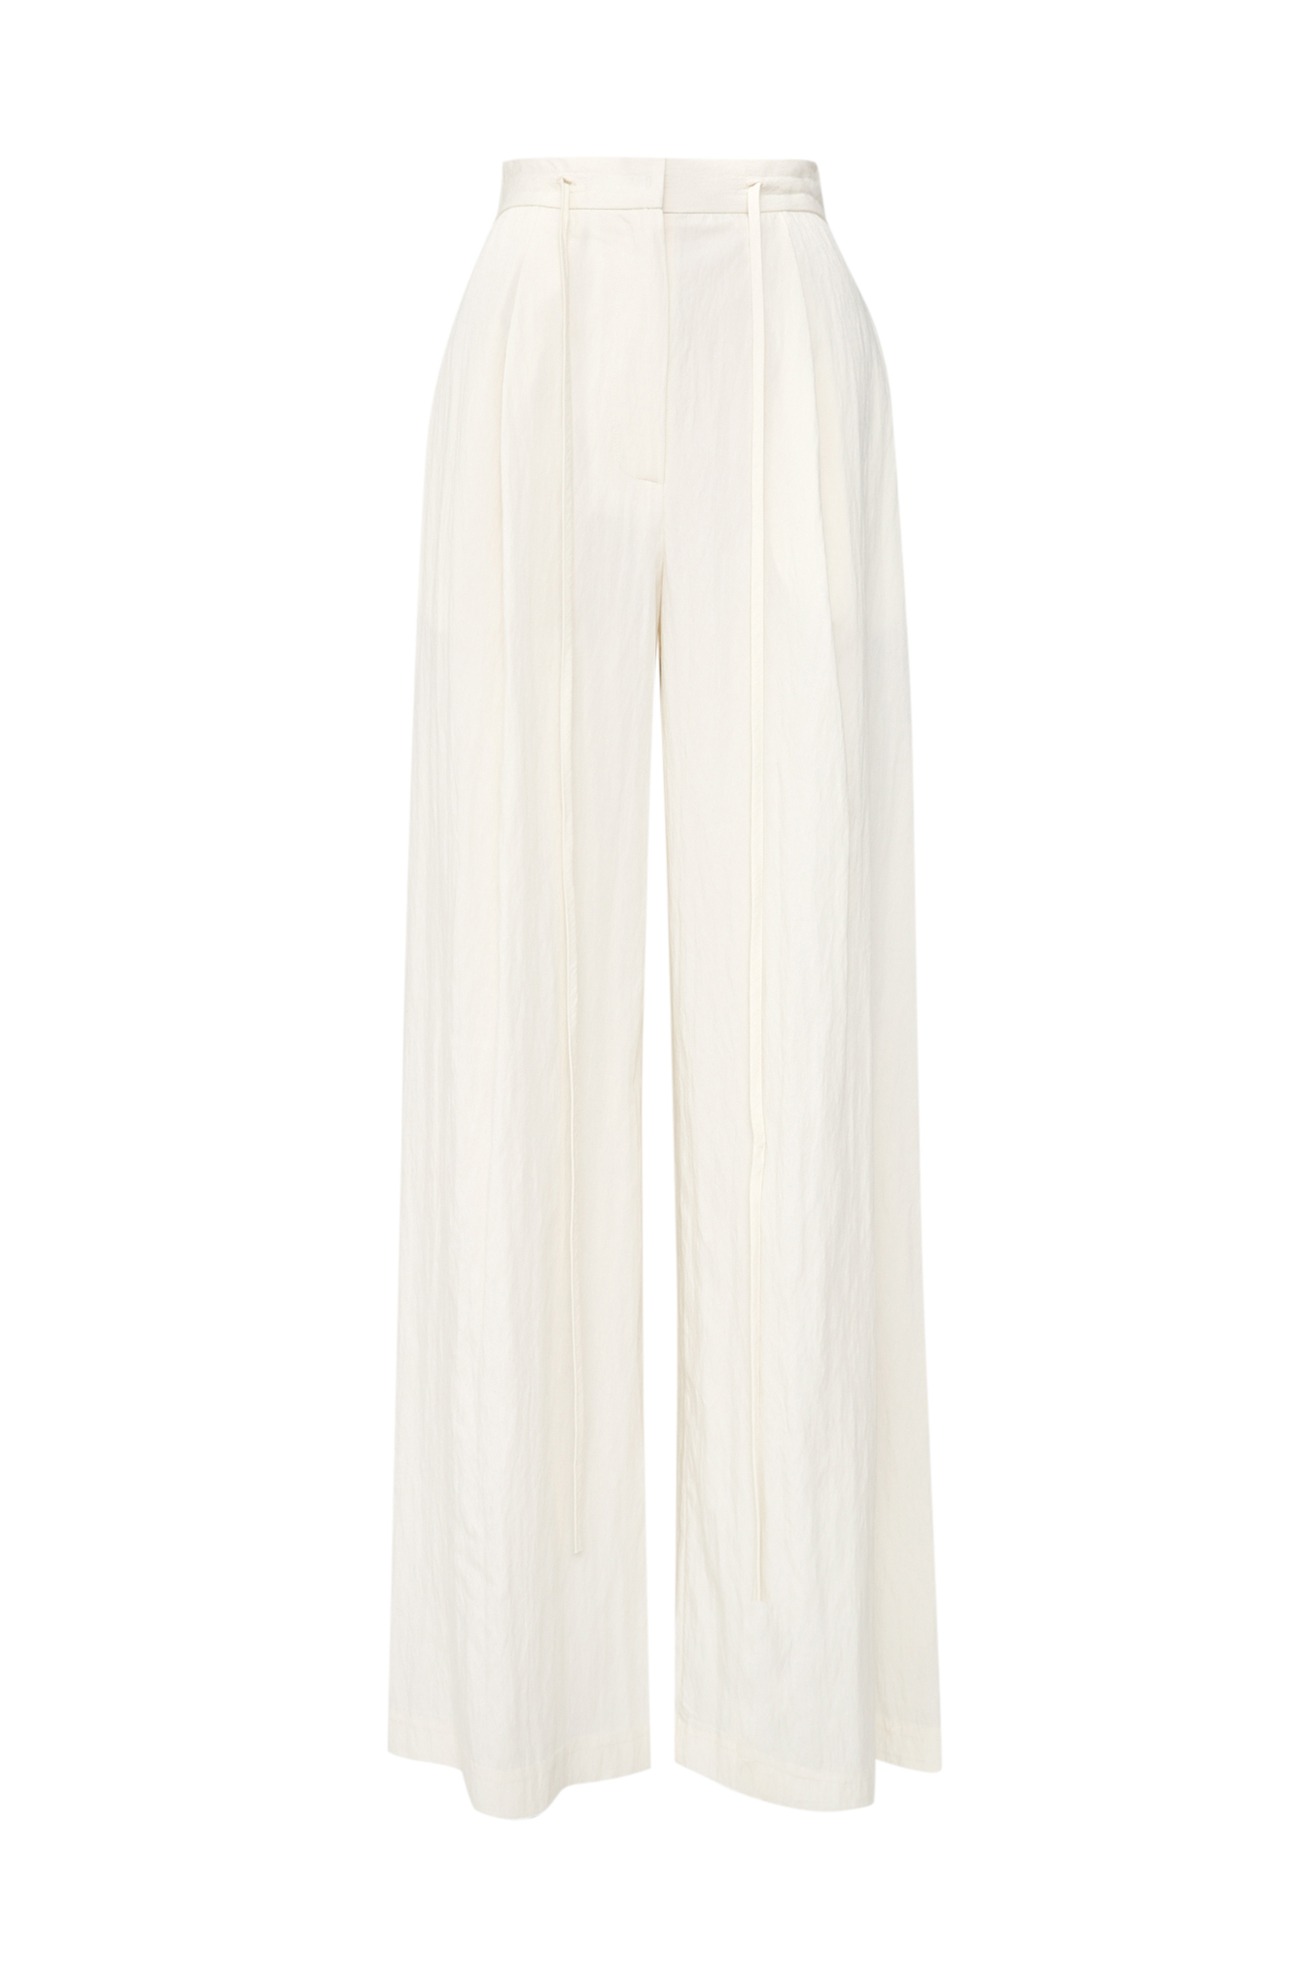 Wide String Trousers  (5/31일 순차발송)